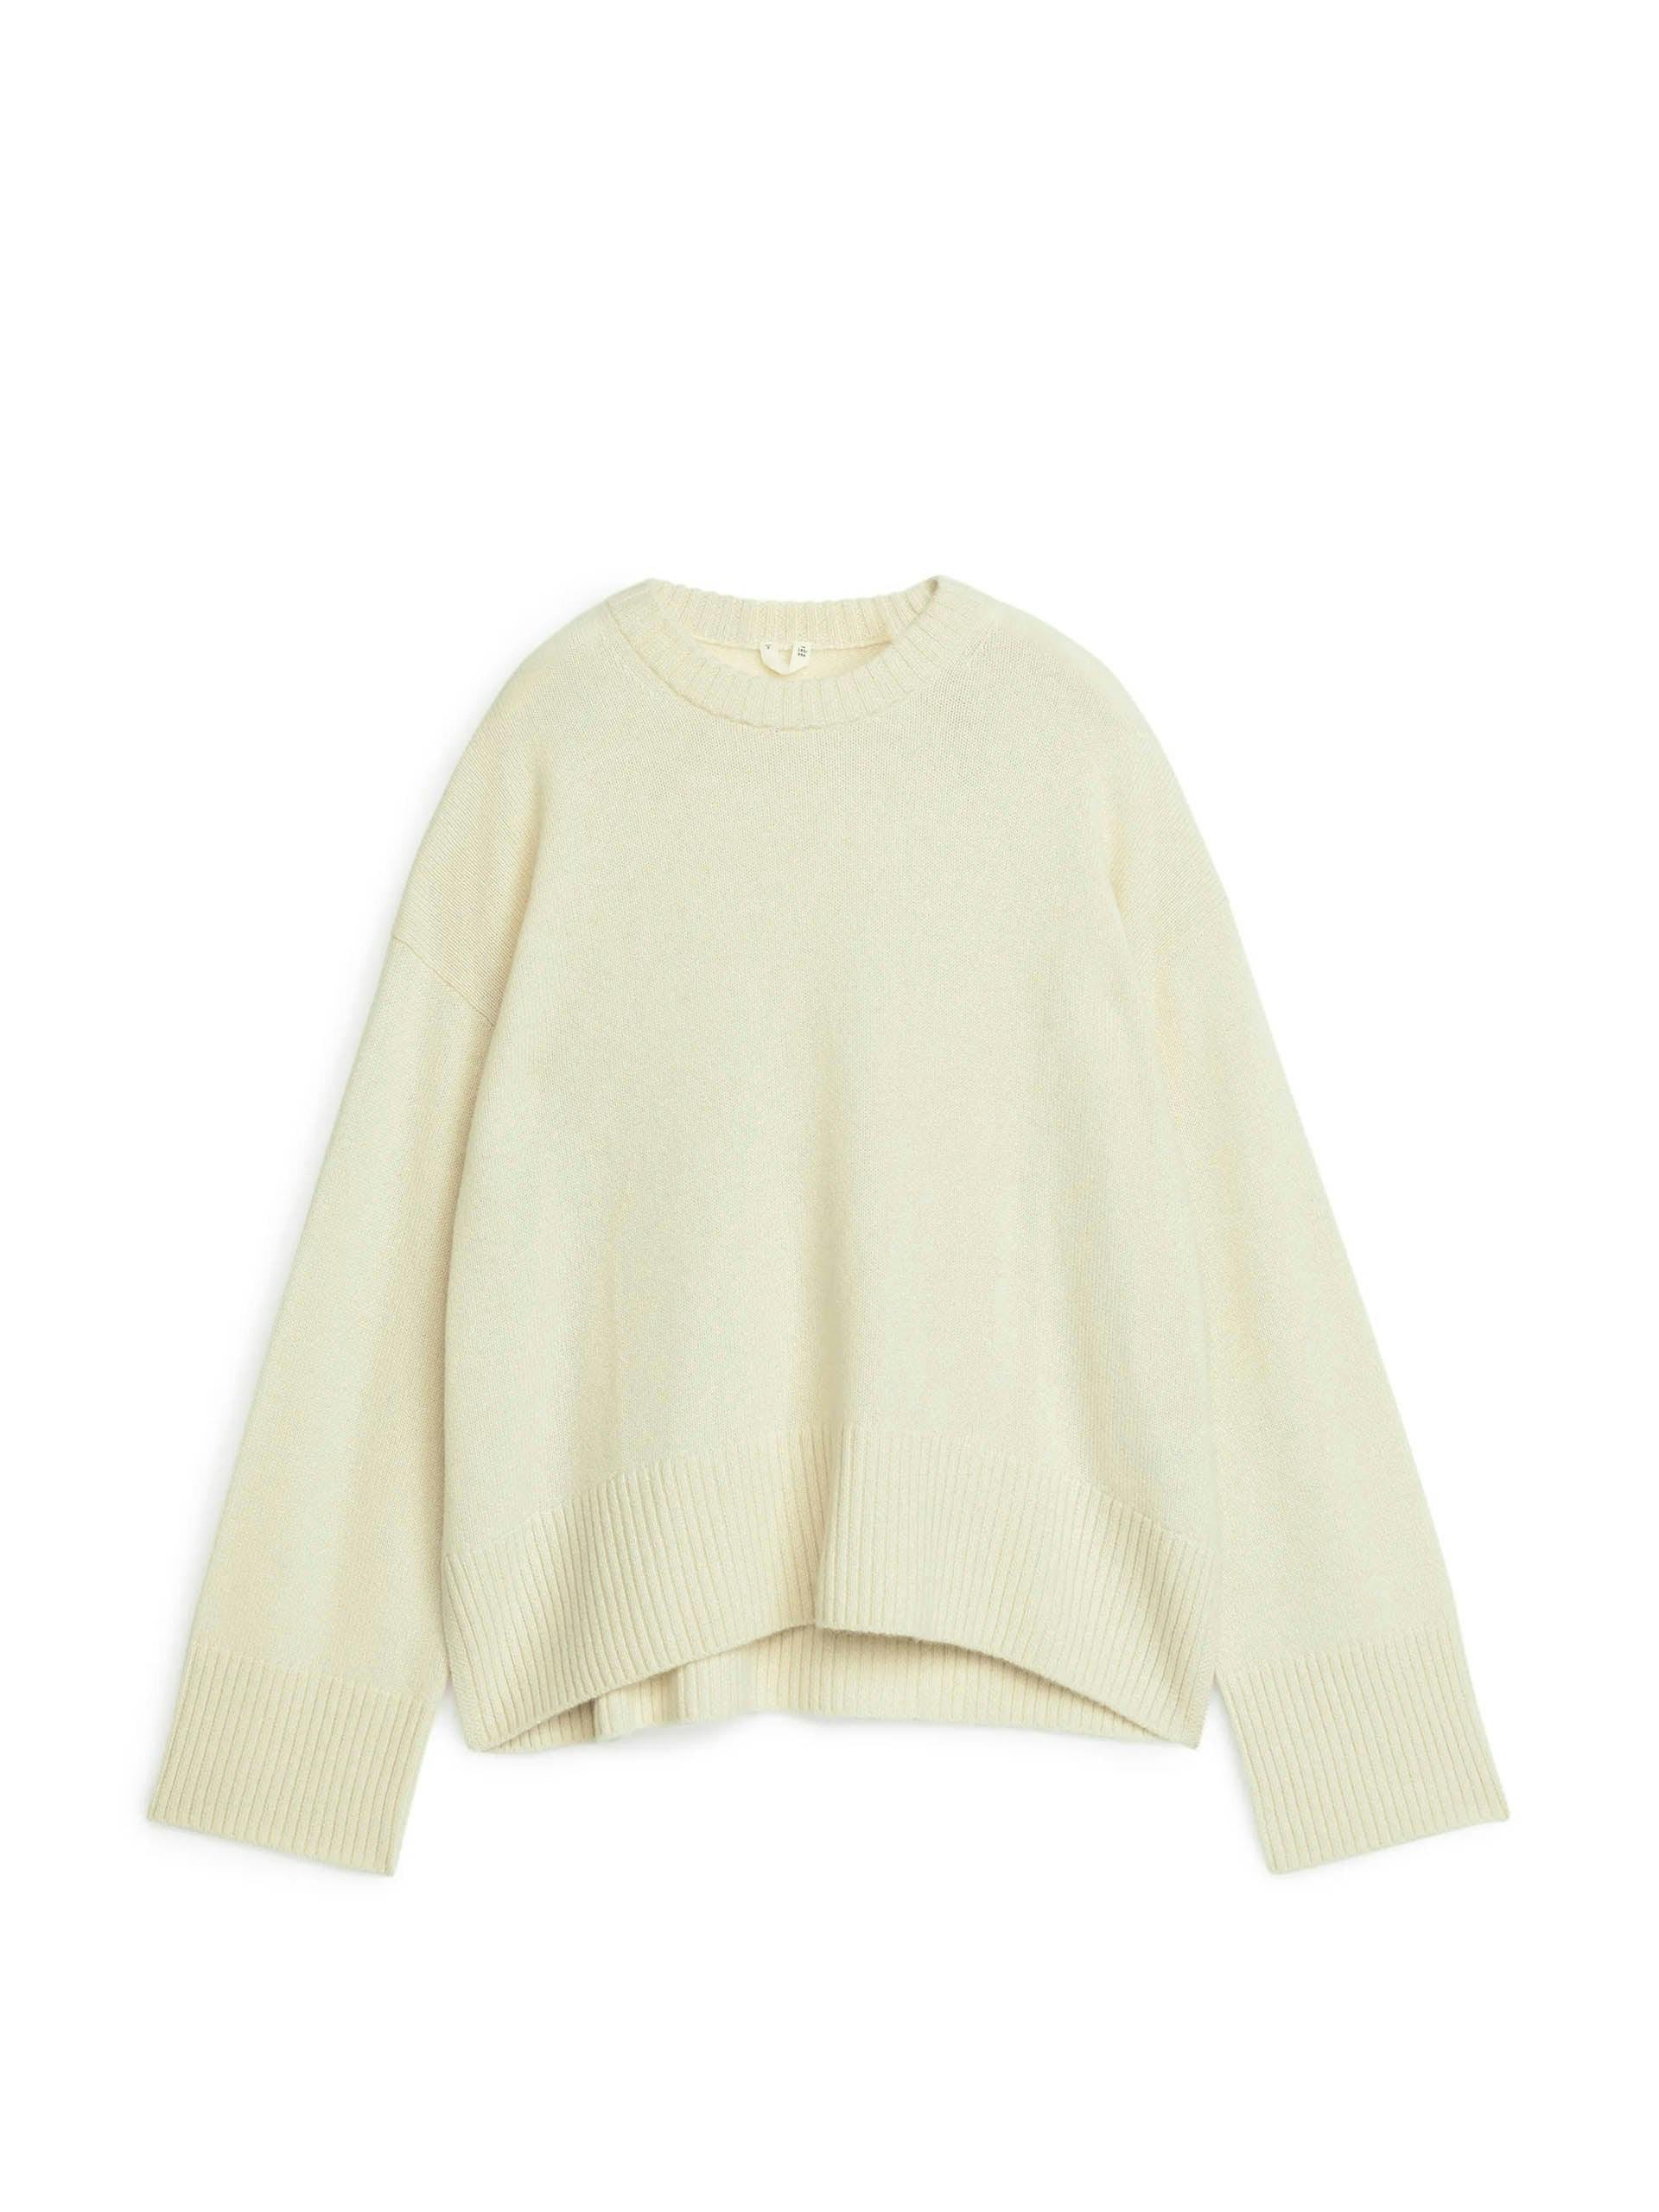 Off-white relaxed cashmere jumper